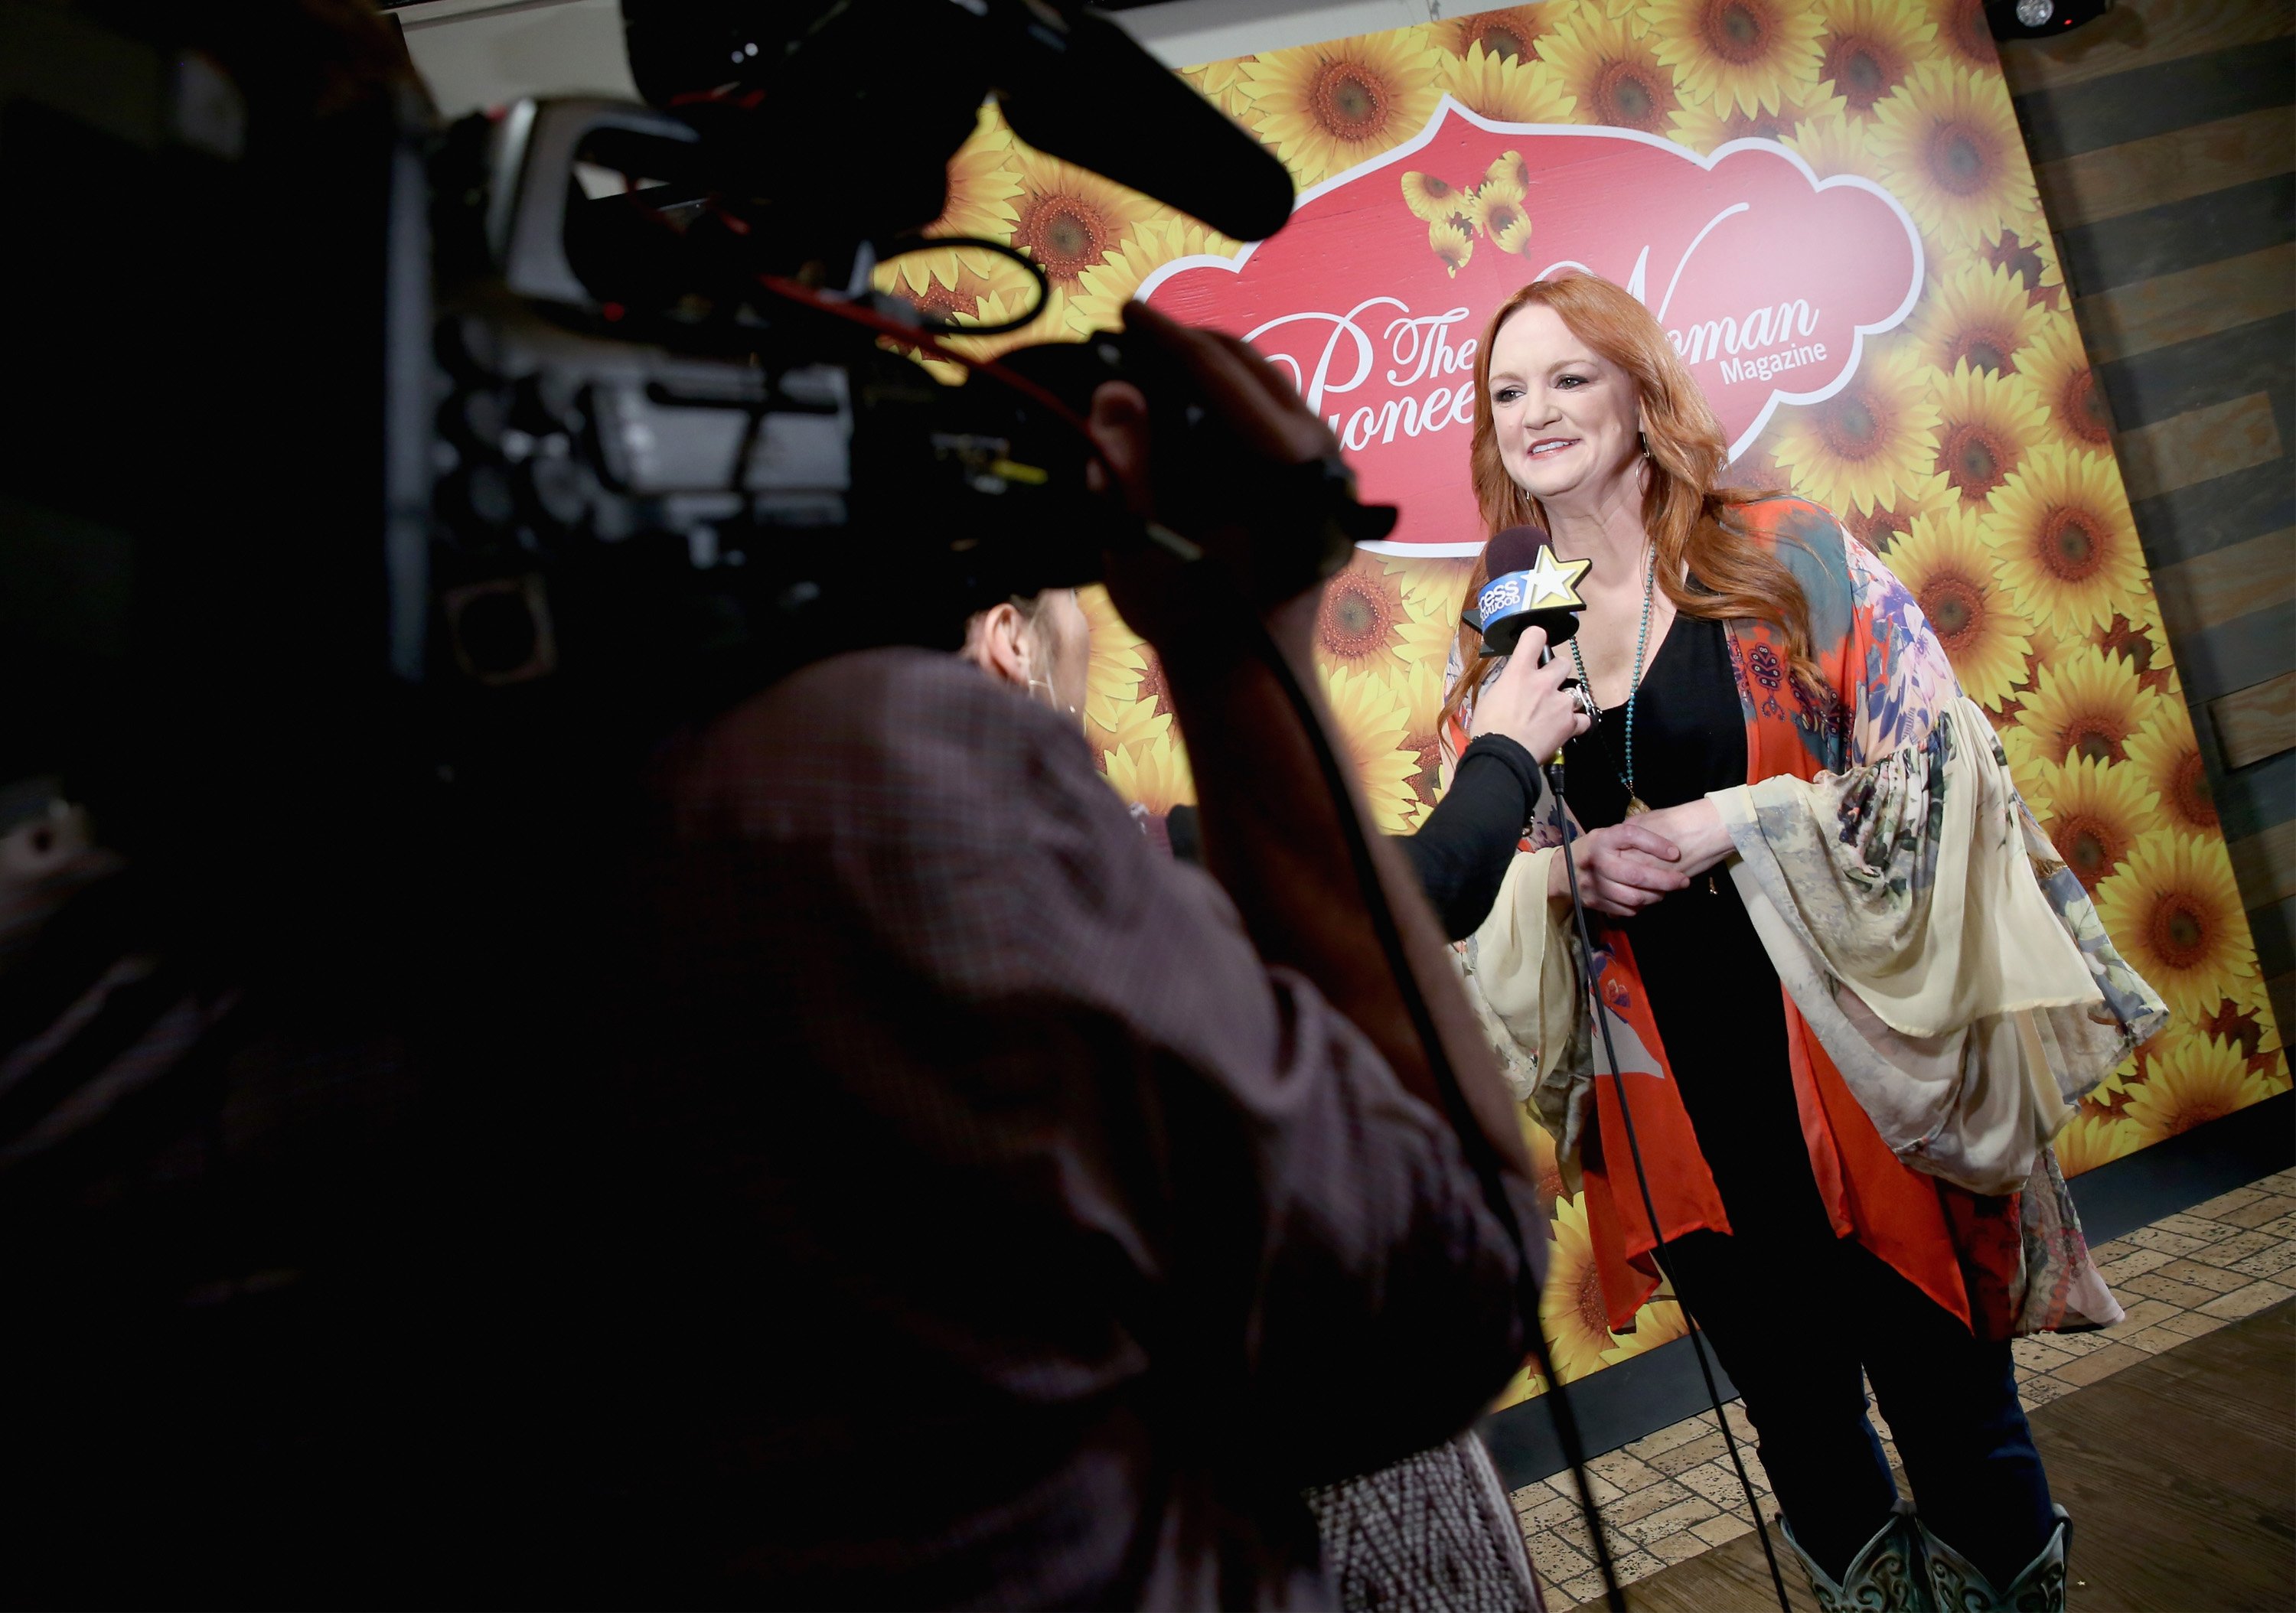 Food Network star Ree Drummond stands as she is filmed for an interview in this photograph.